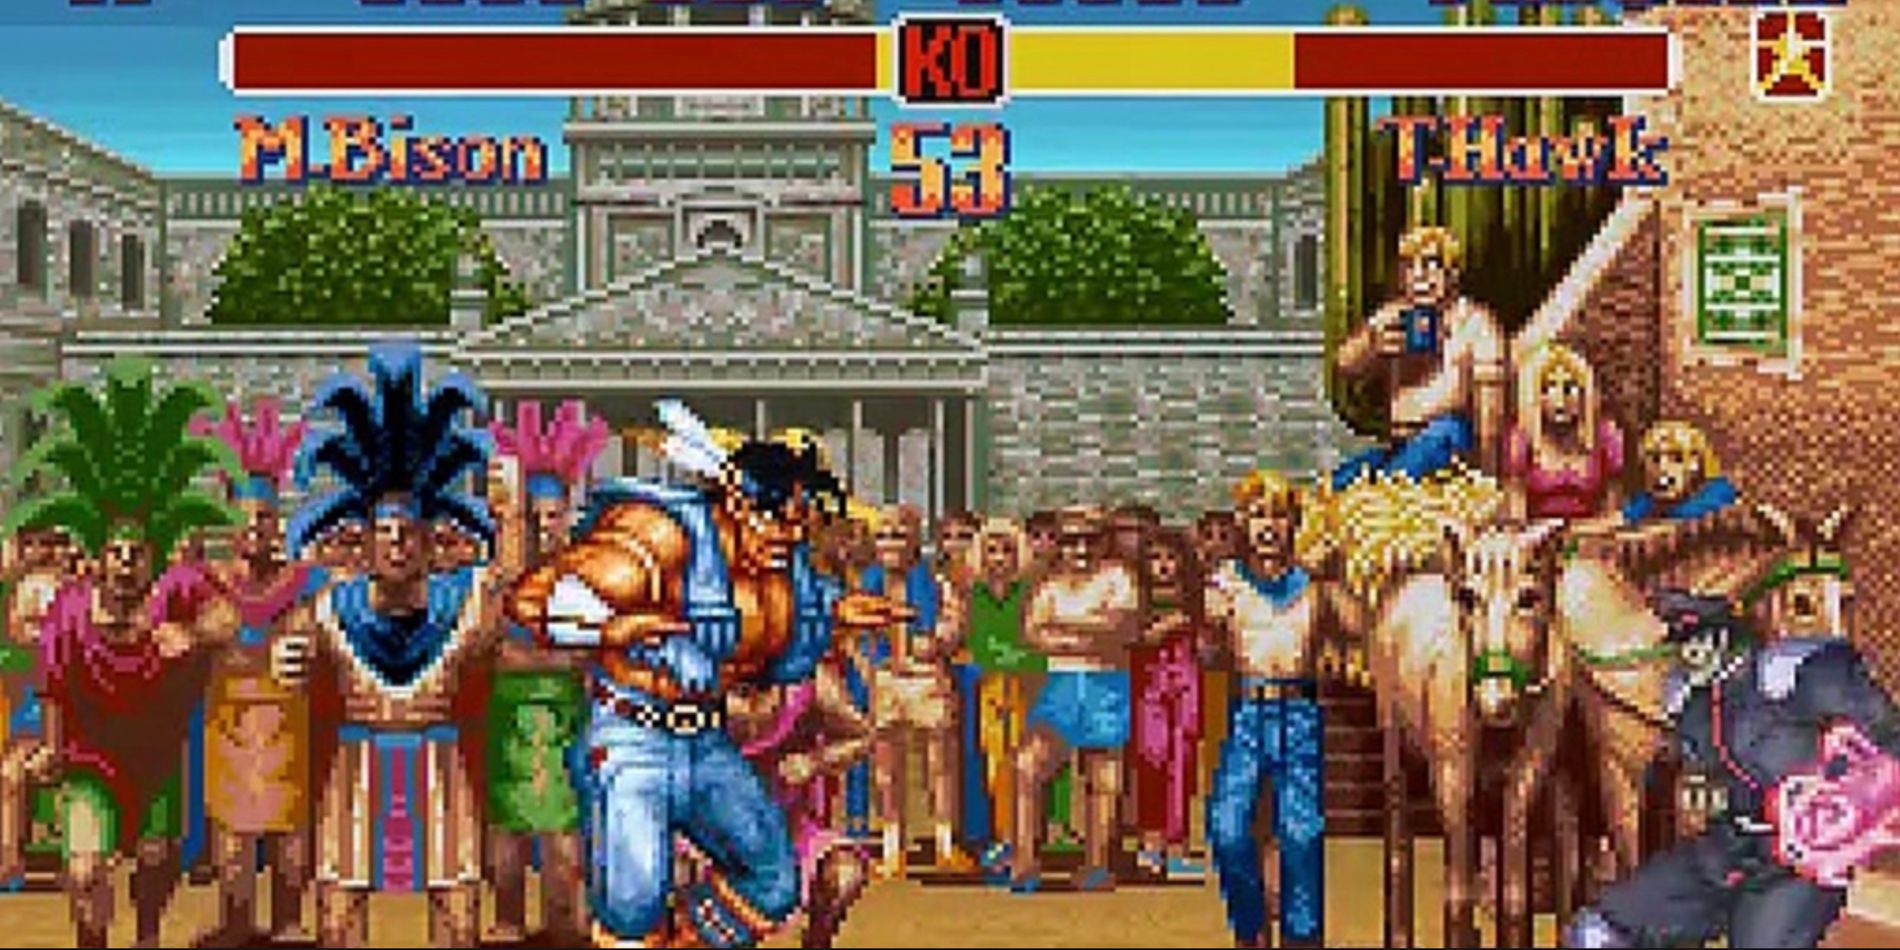 T. Hawk fights M. Bison in Super Street Fighter II: The New Challengers